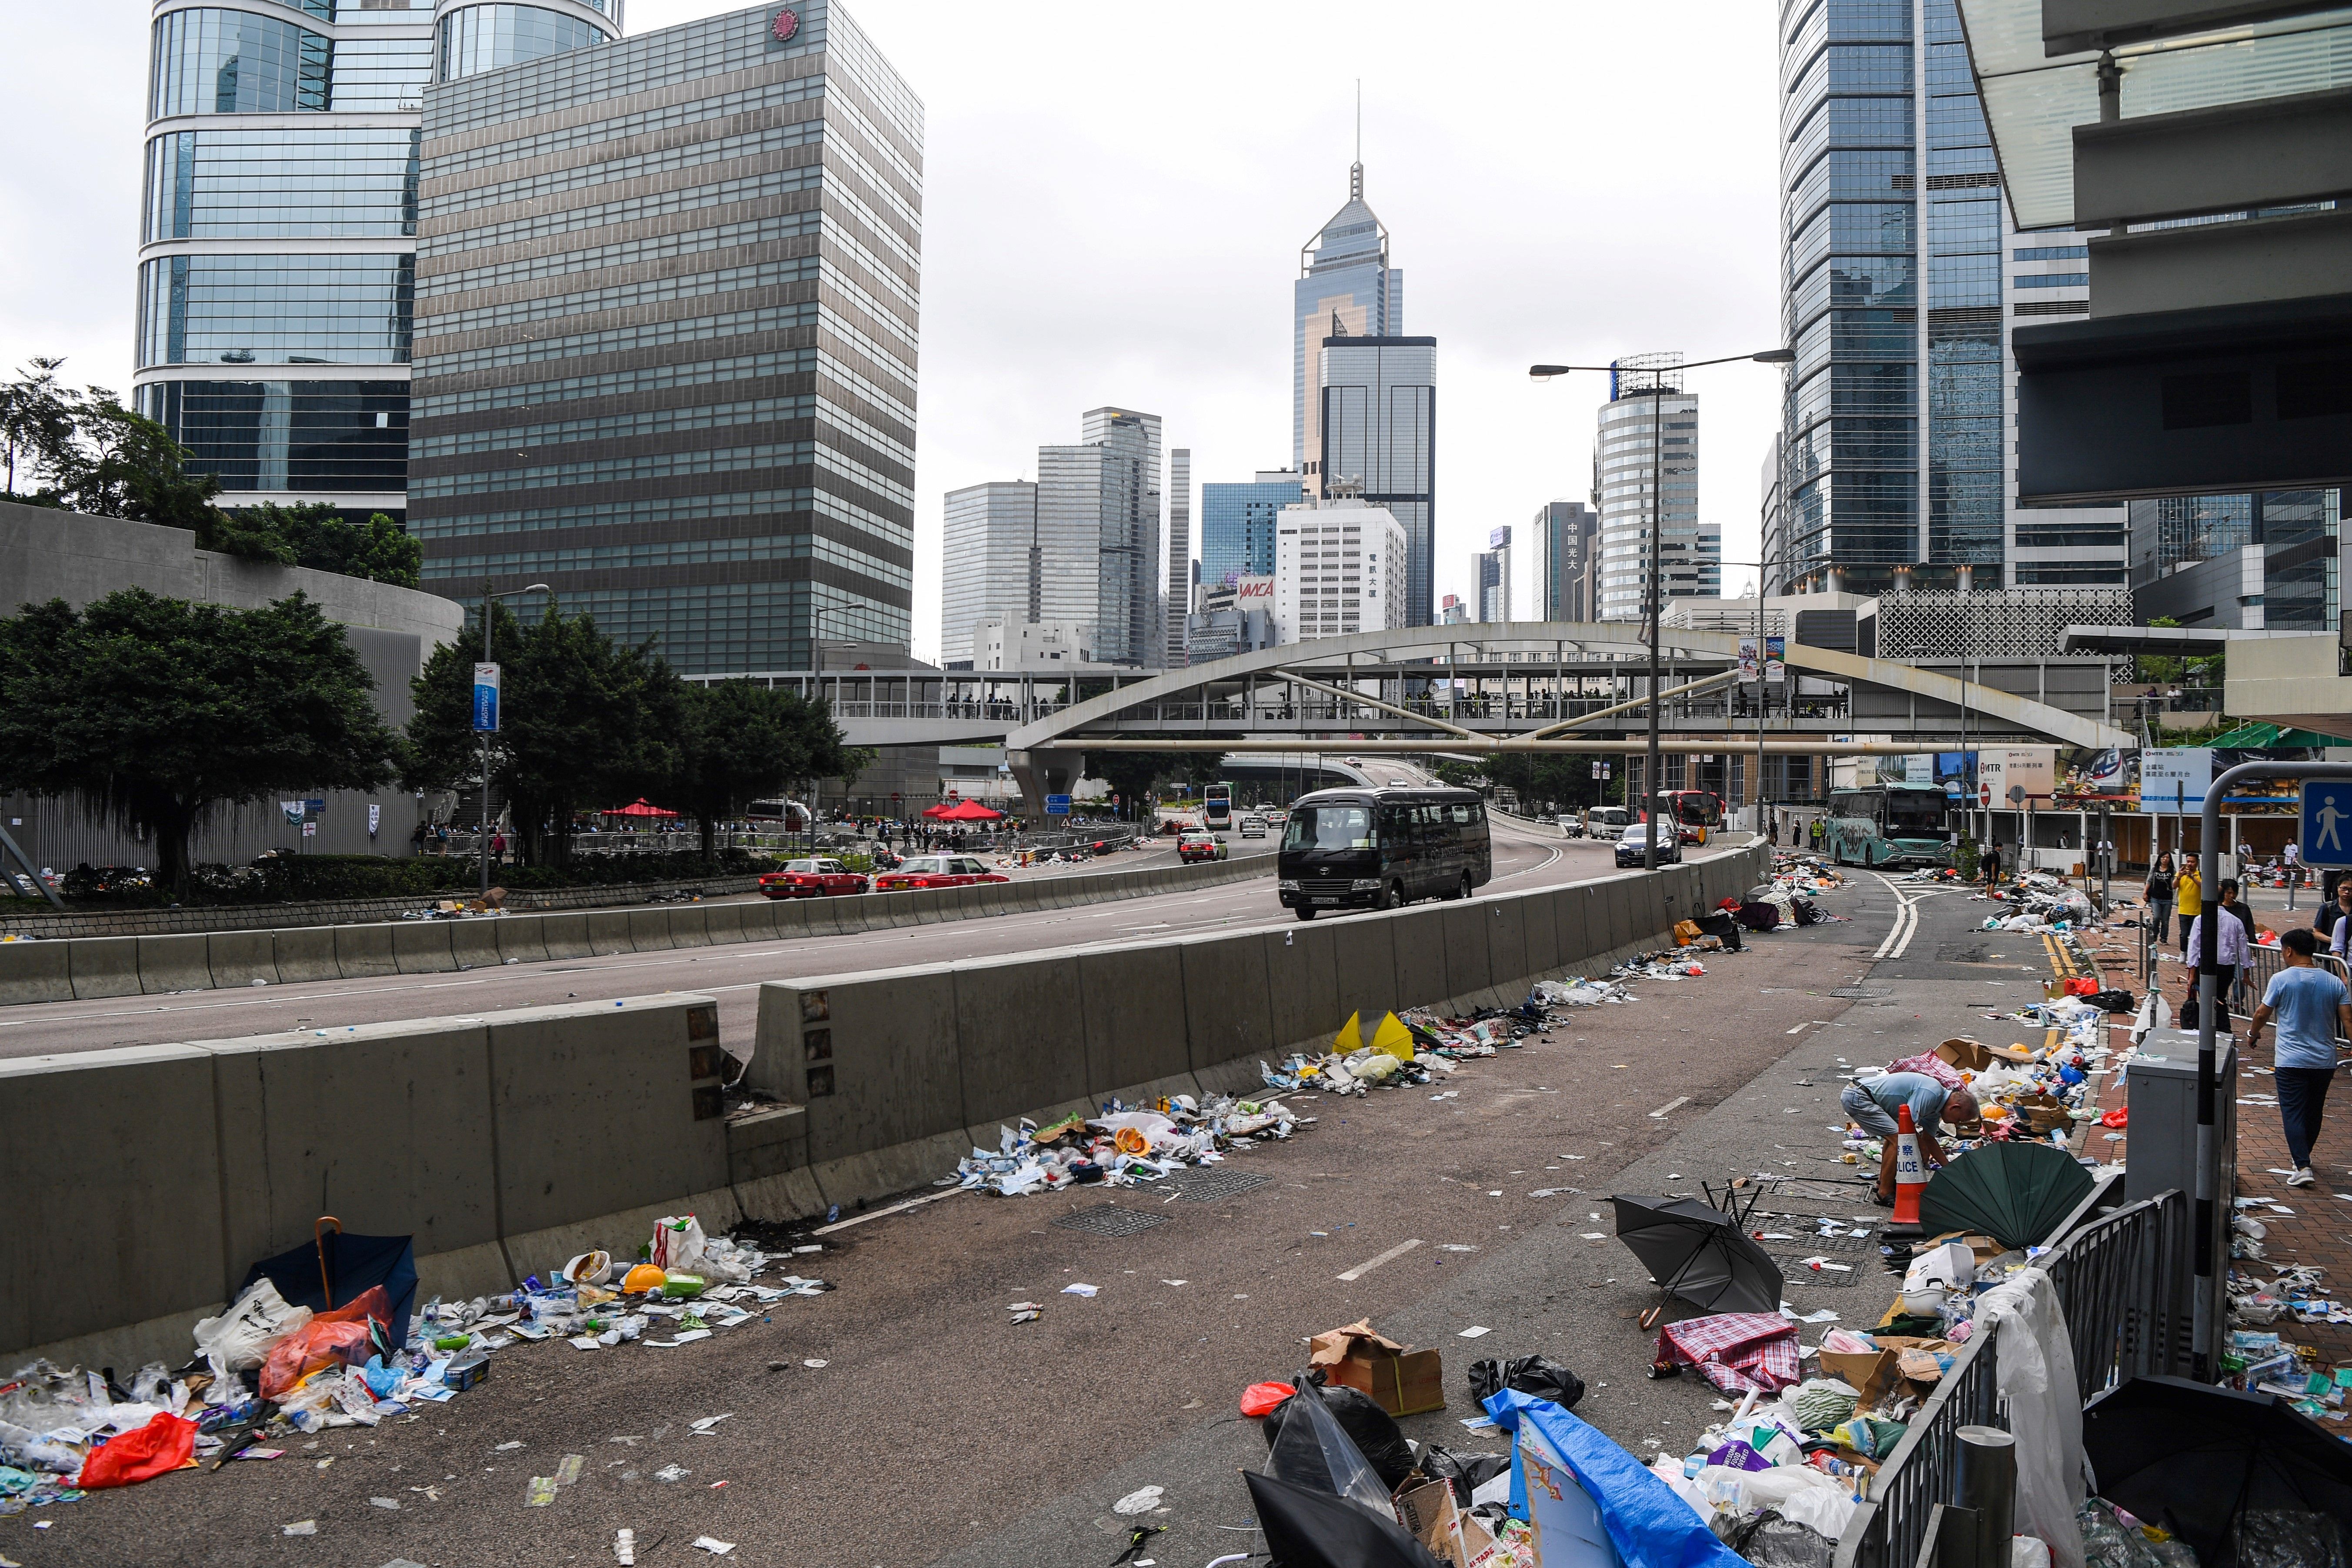 People walk on a street full of debris a day after a demonstration against a controversial extradition law proposal in Hong Kong on June 13, 2019.